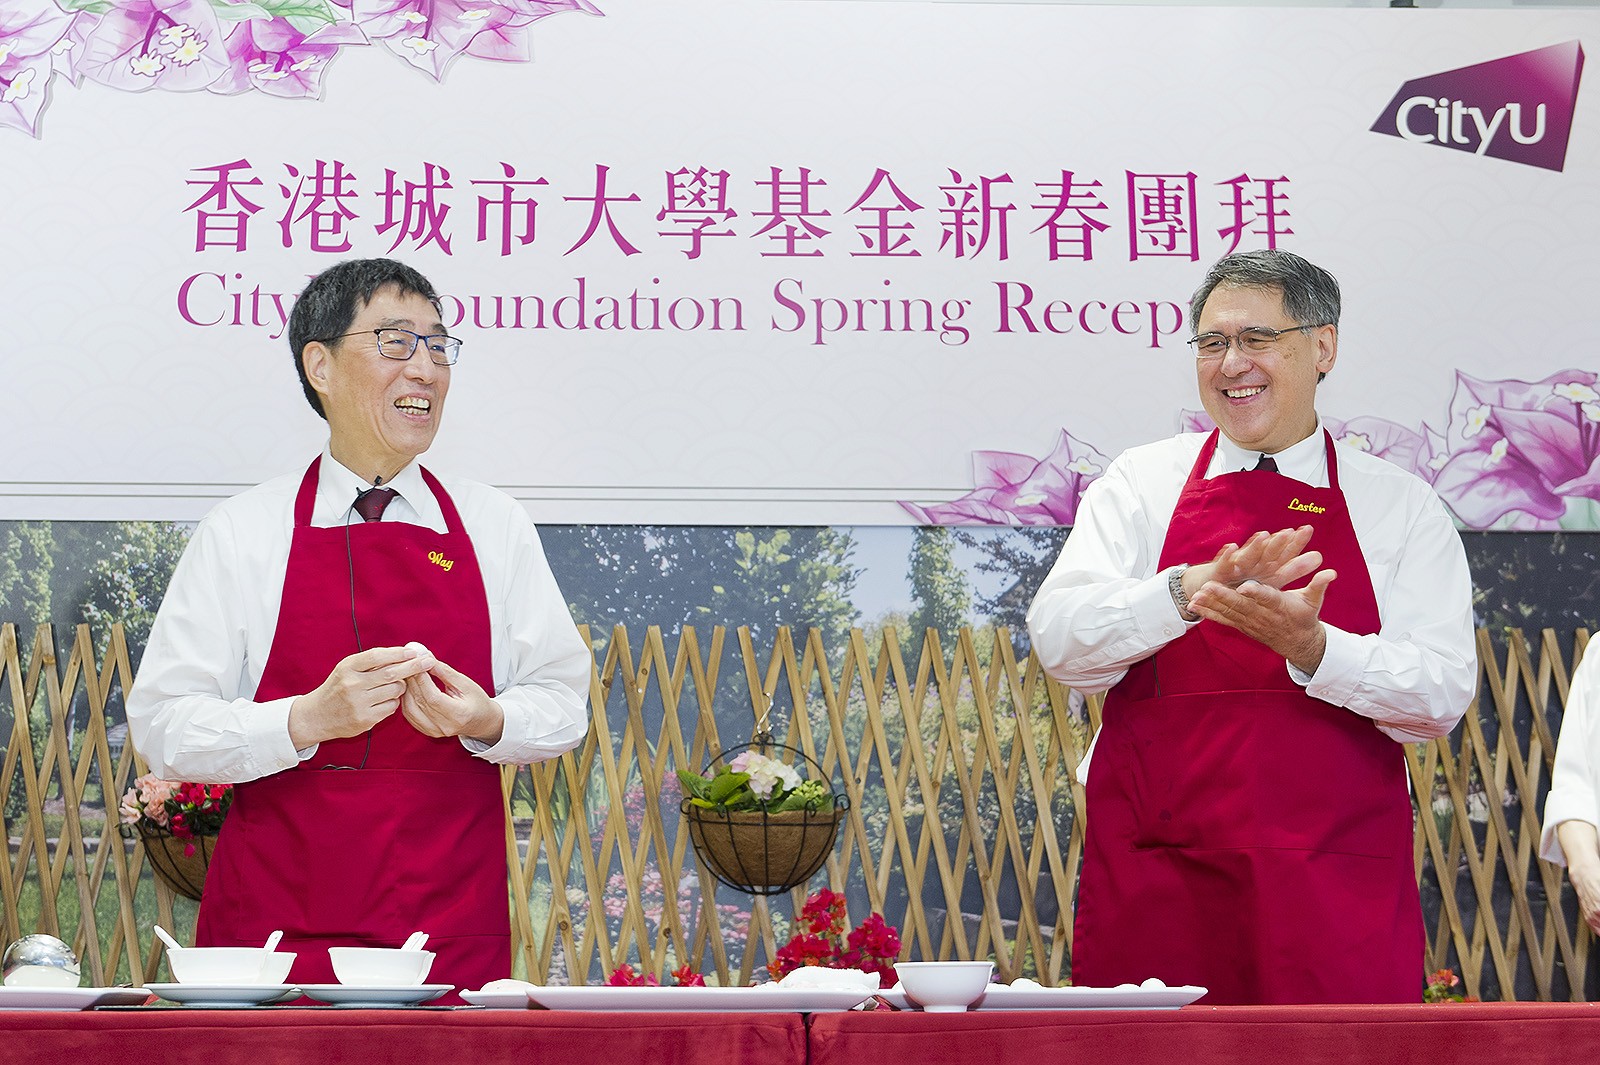 Professor Kuo (left) and Mr Huang made pig-shaped glutinous rice dumplings to say thank you to members of CityU Foundation and CityU good friends for their support. 